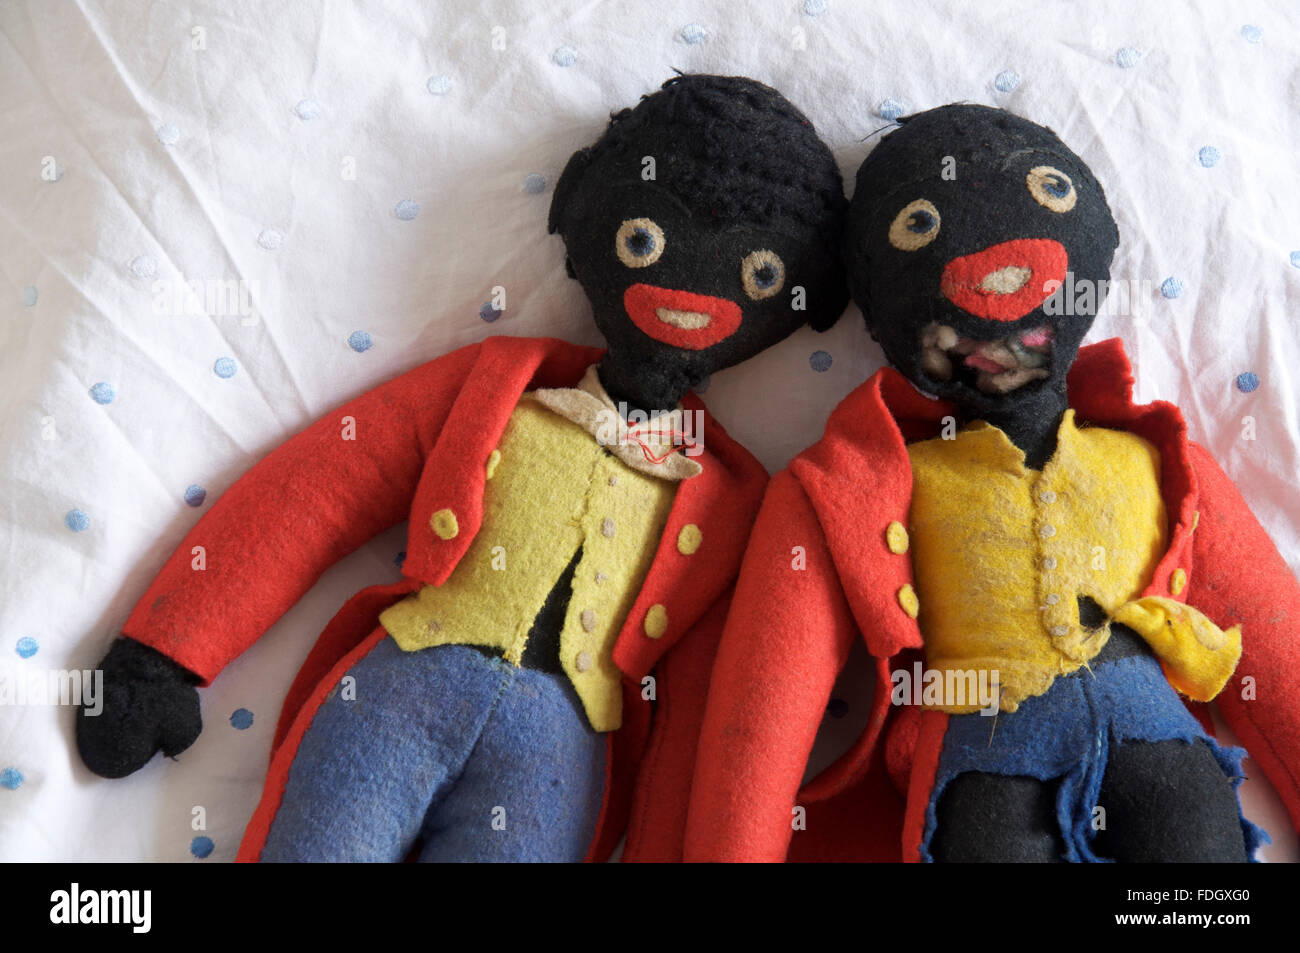 Two old well worn and much loved golliwog dolls lying together on a white bedsheet. Stock Photo